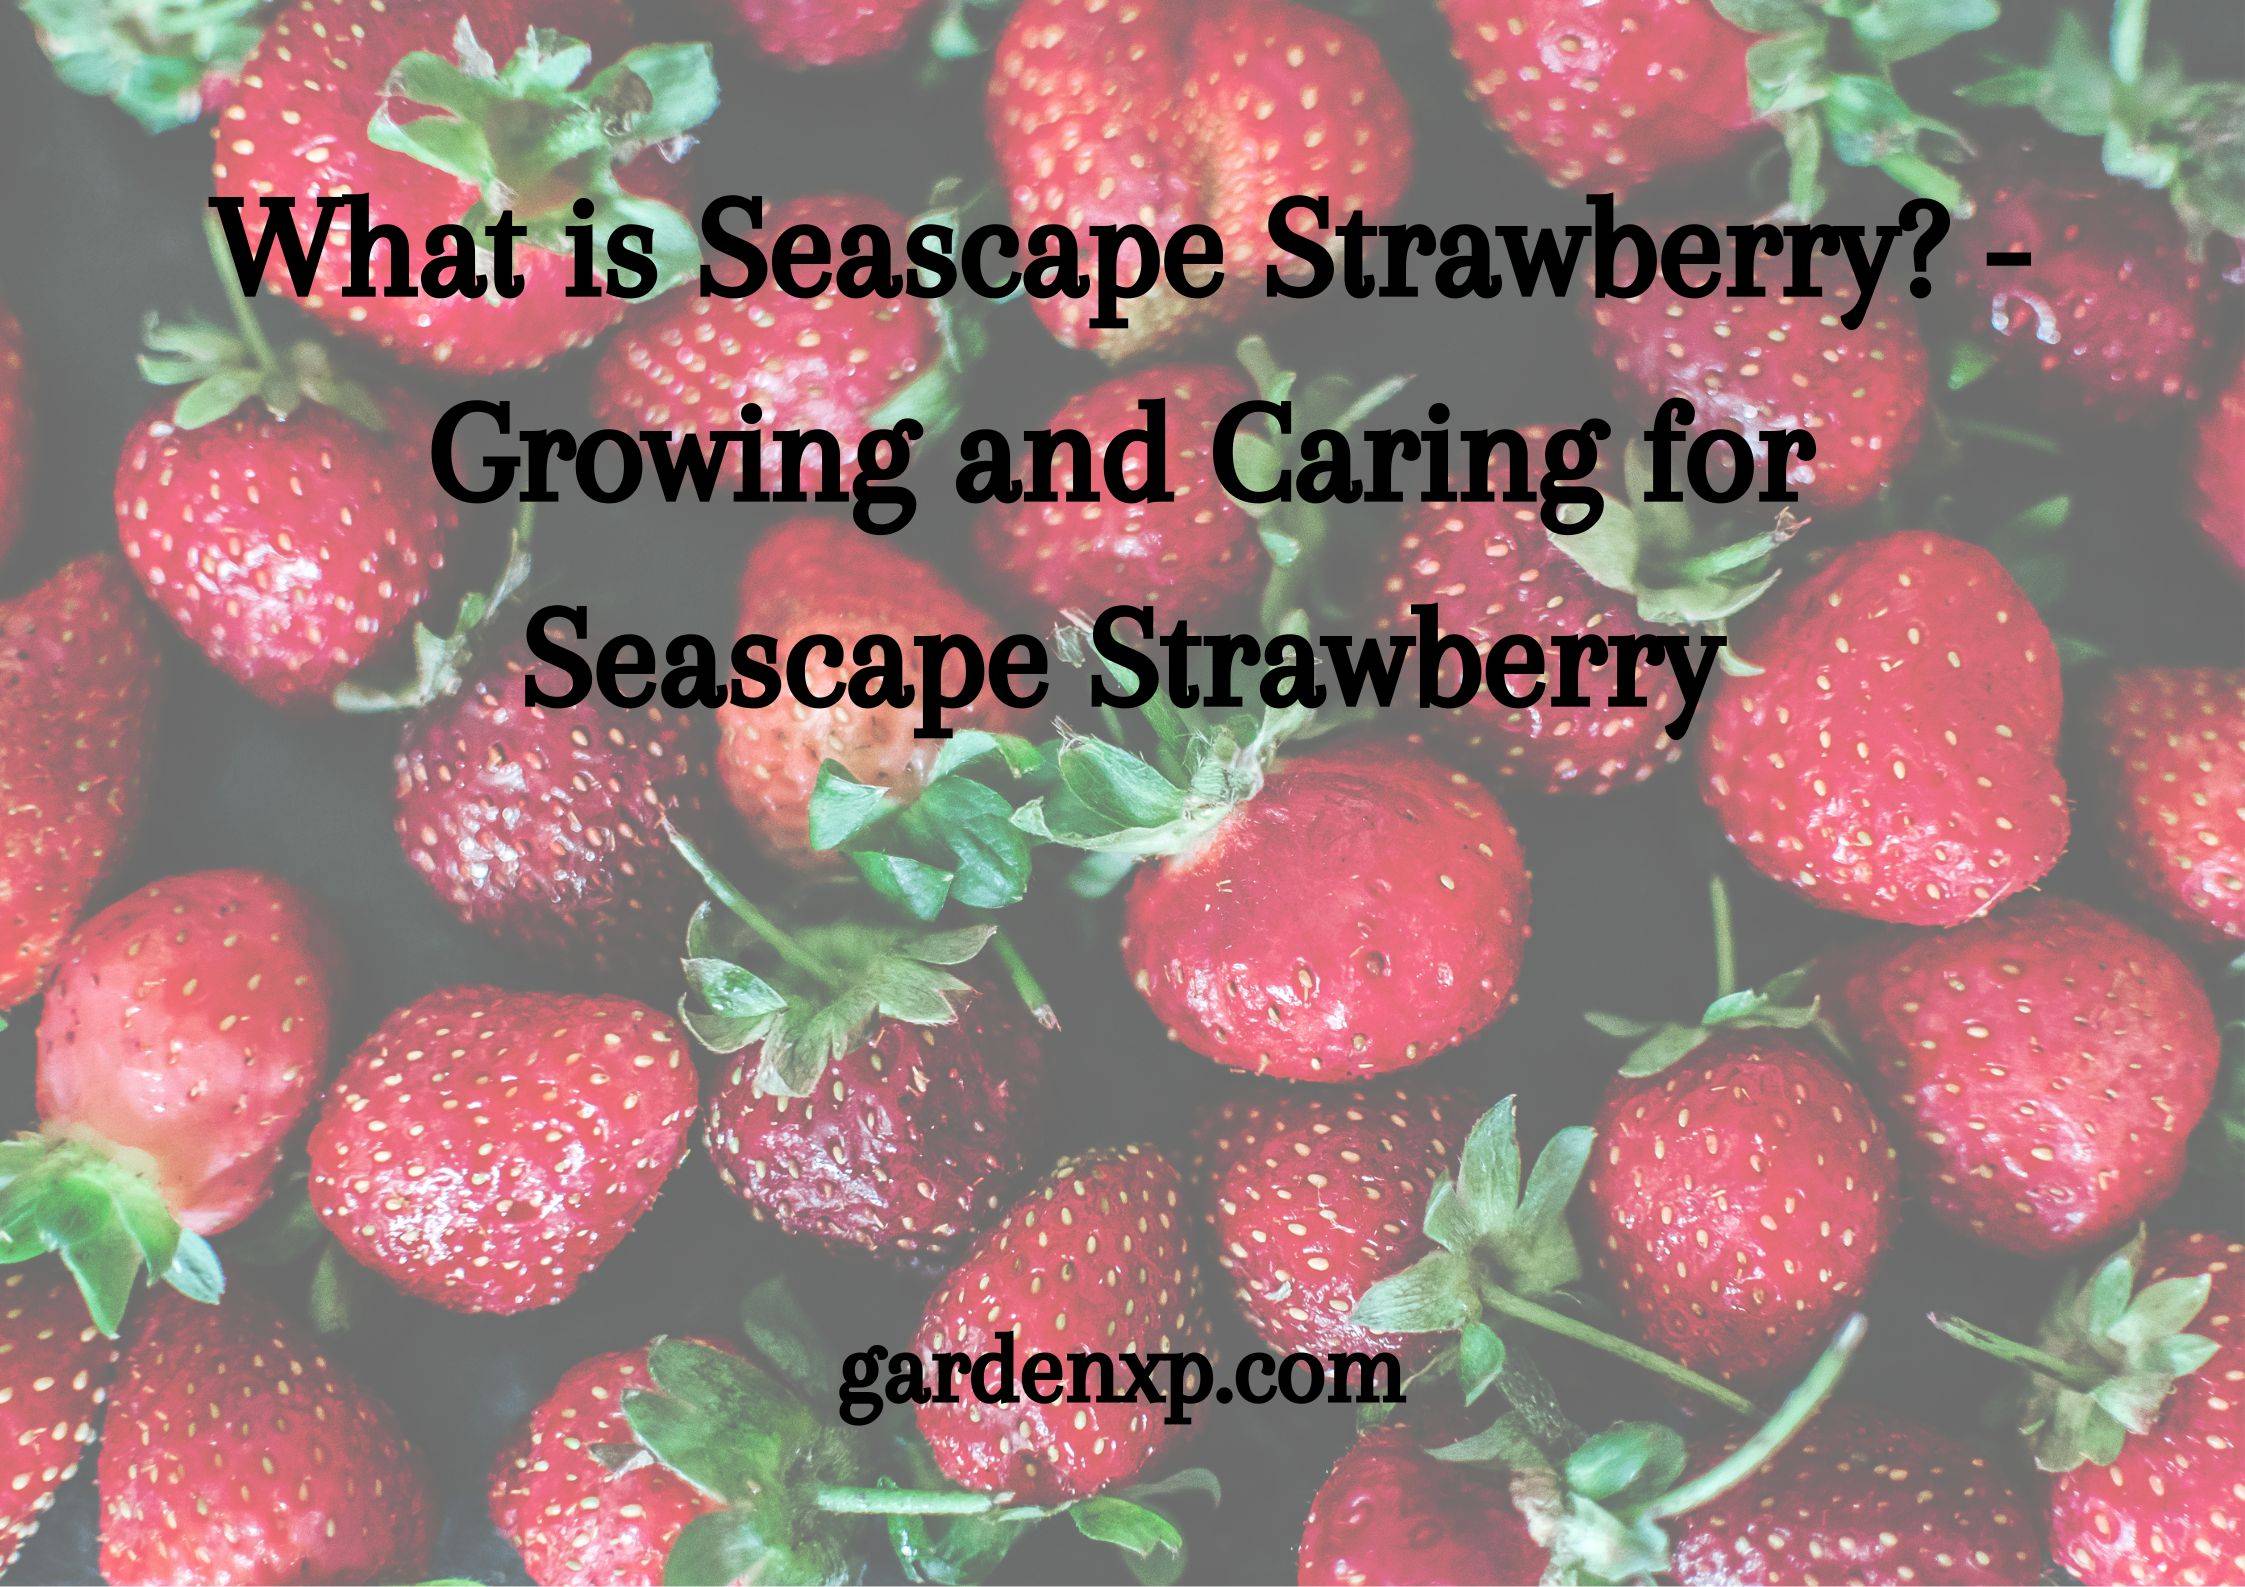 What is Seascape Strawberry - Growing and Caring for Seascape Strawberry